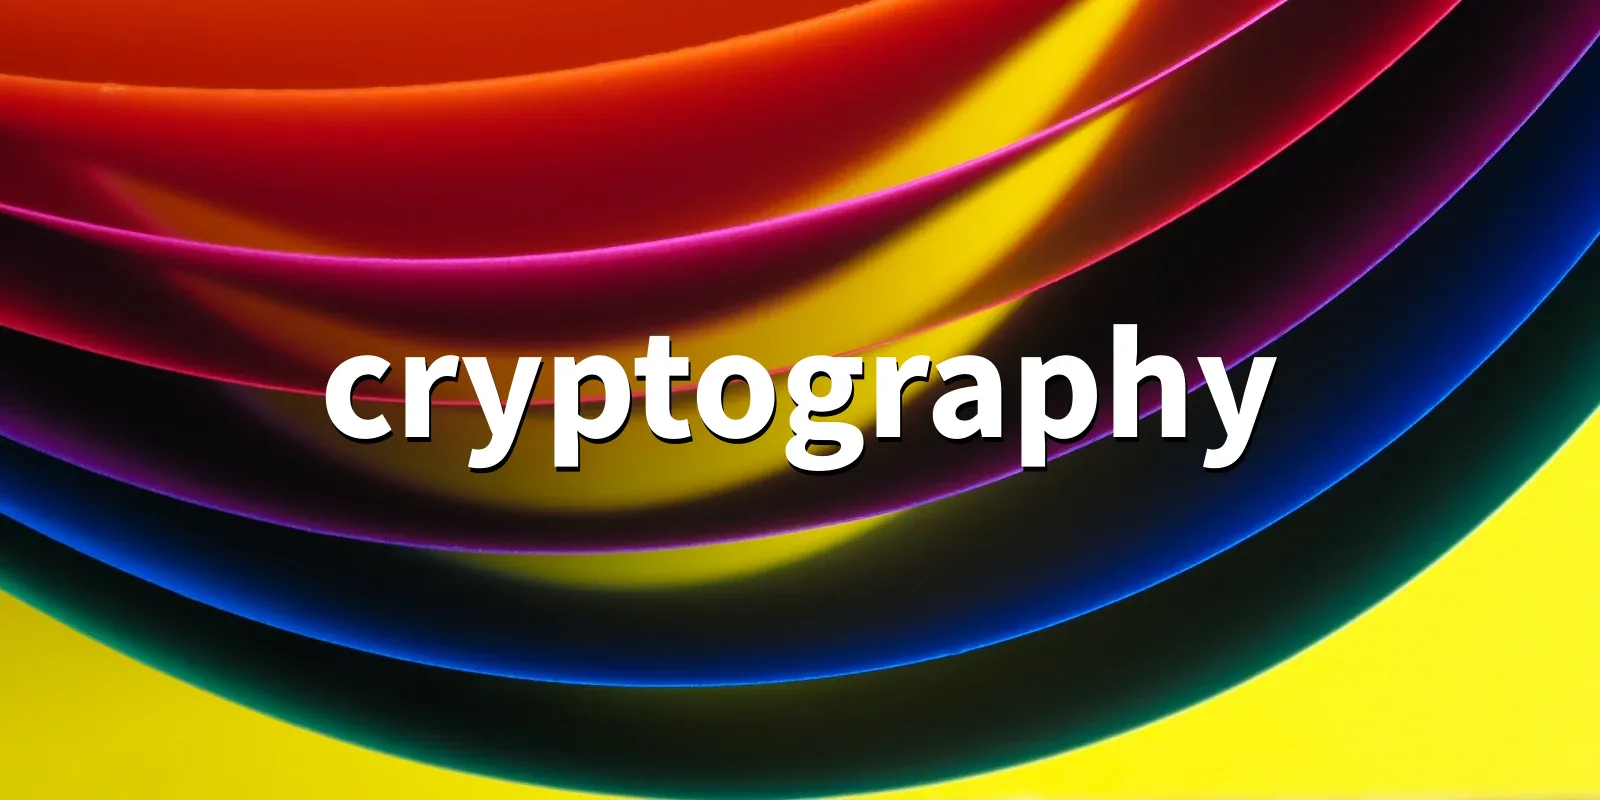 /pkg/c/cryptography/cryptography-banner.webp